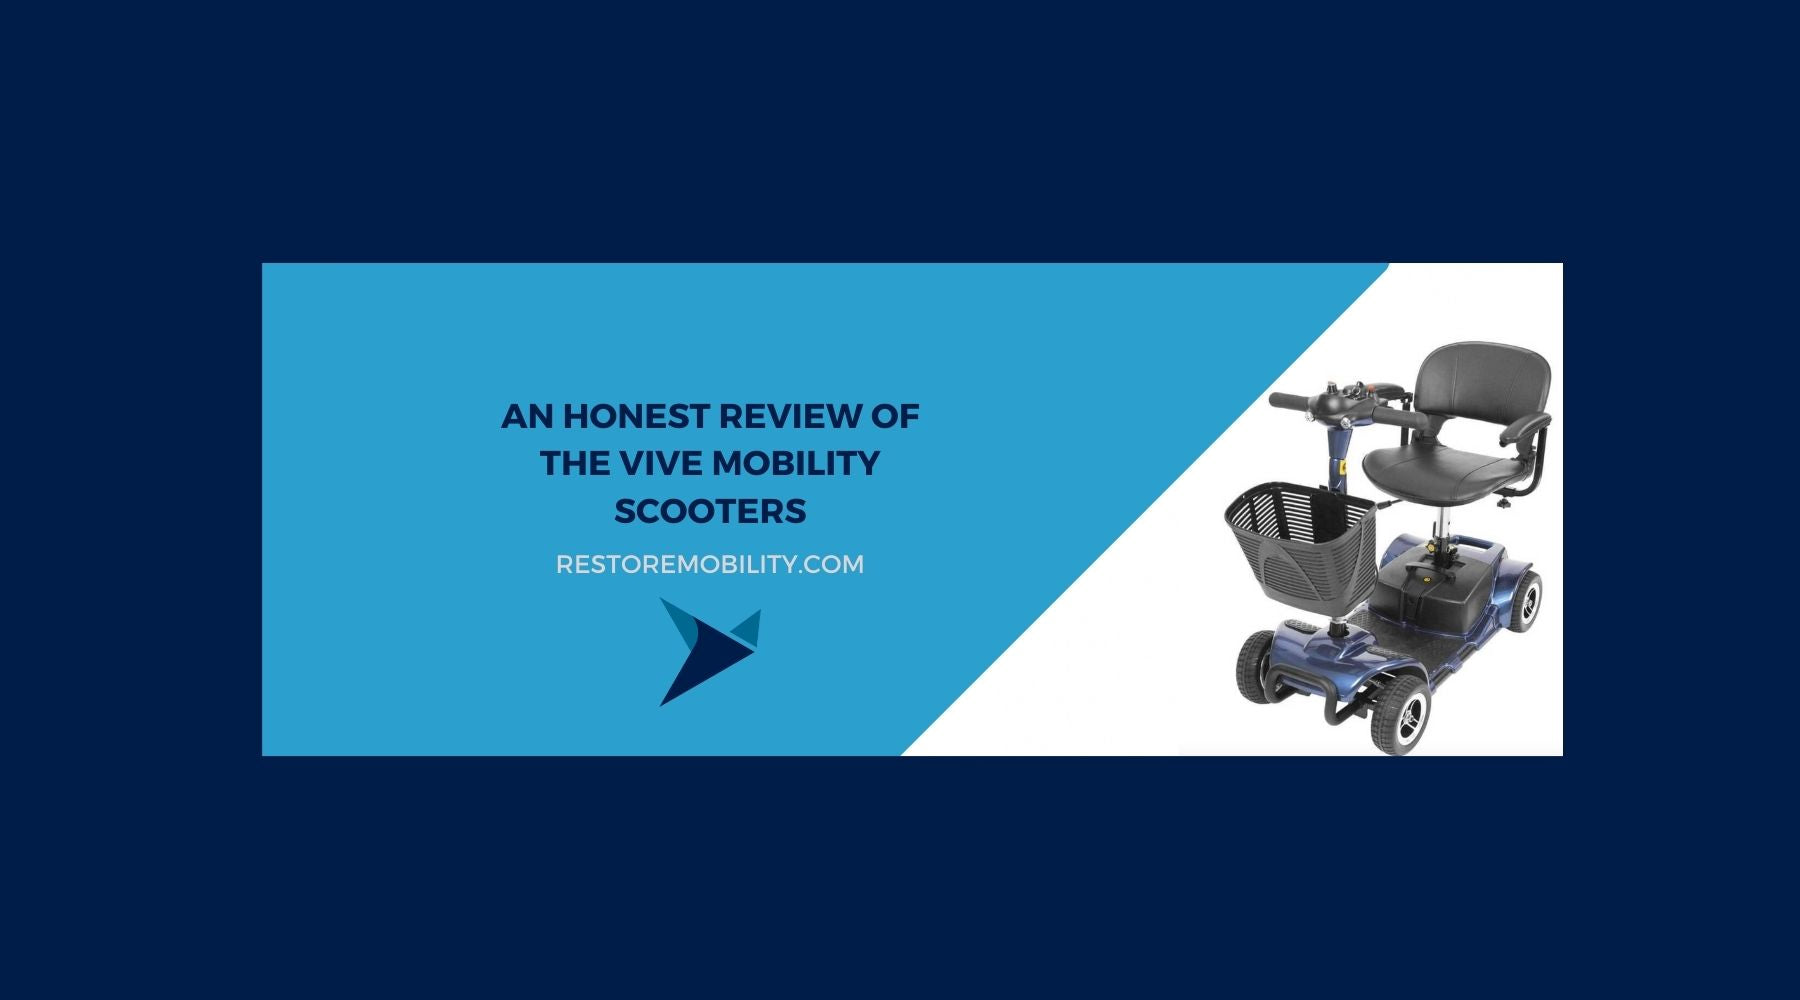 An Honest Review of the Vive Mobility Scooters